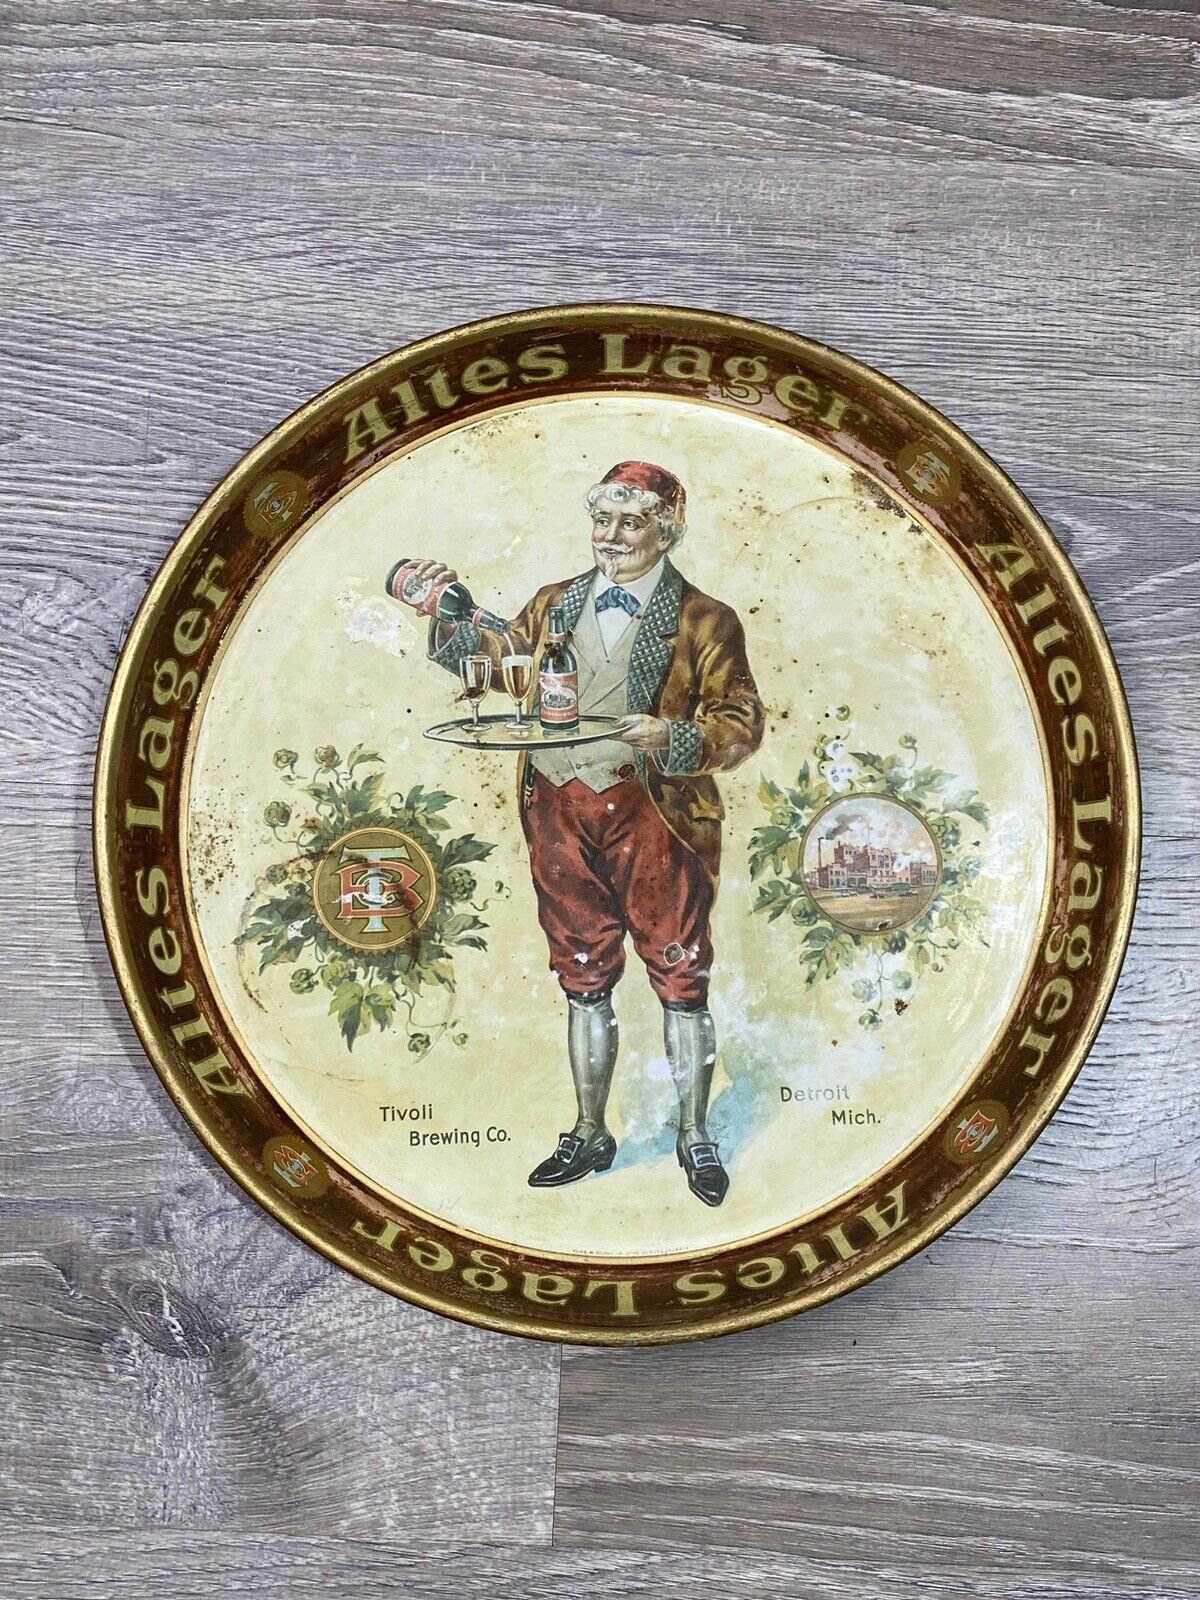 Altes Lager Beer 12” Serving tray, Tivoli Brewing Co. Detroit, Michigan